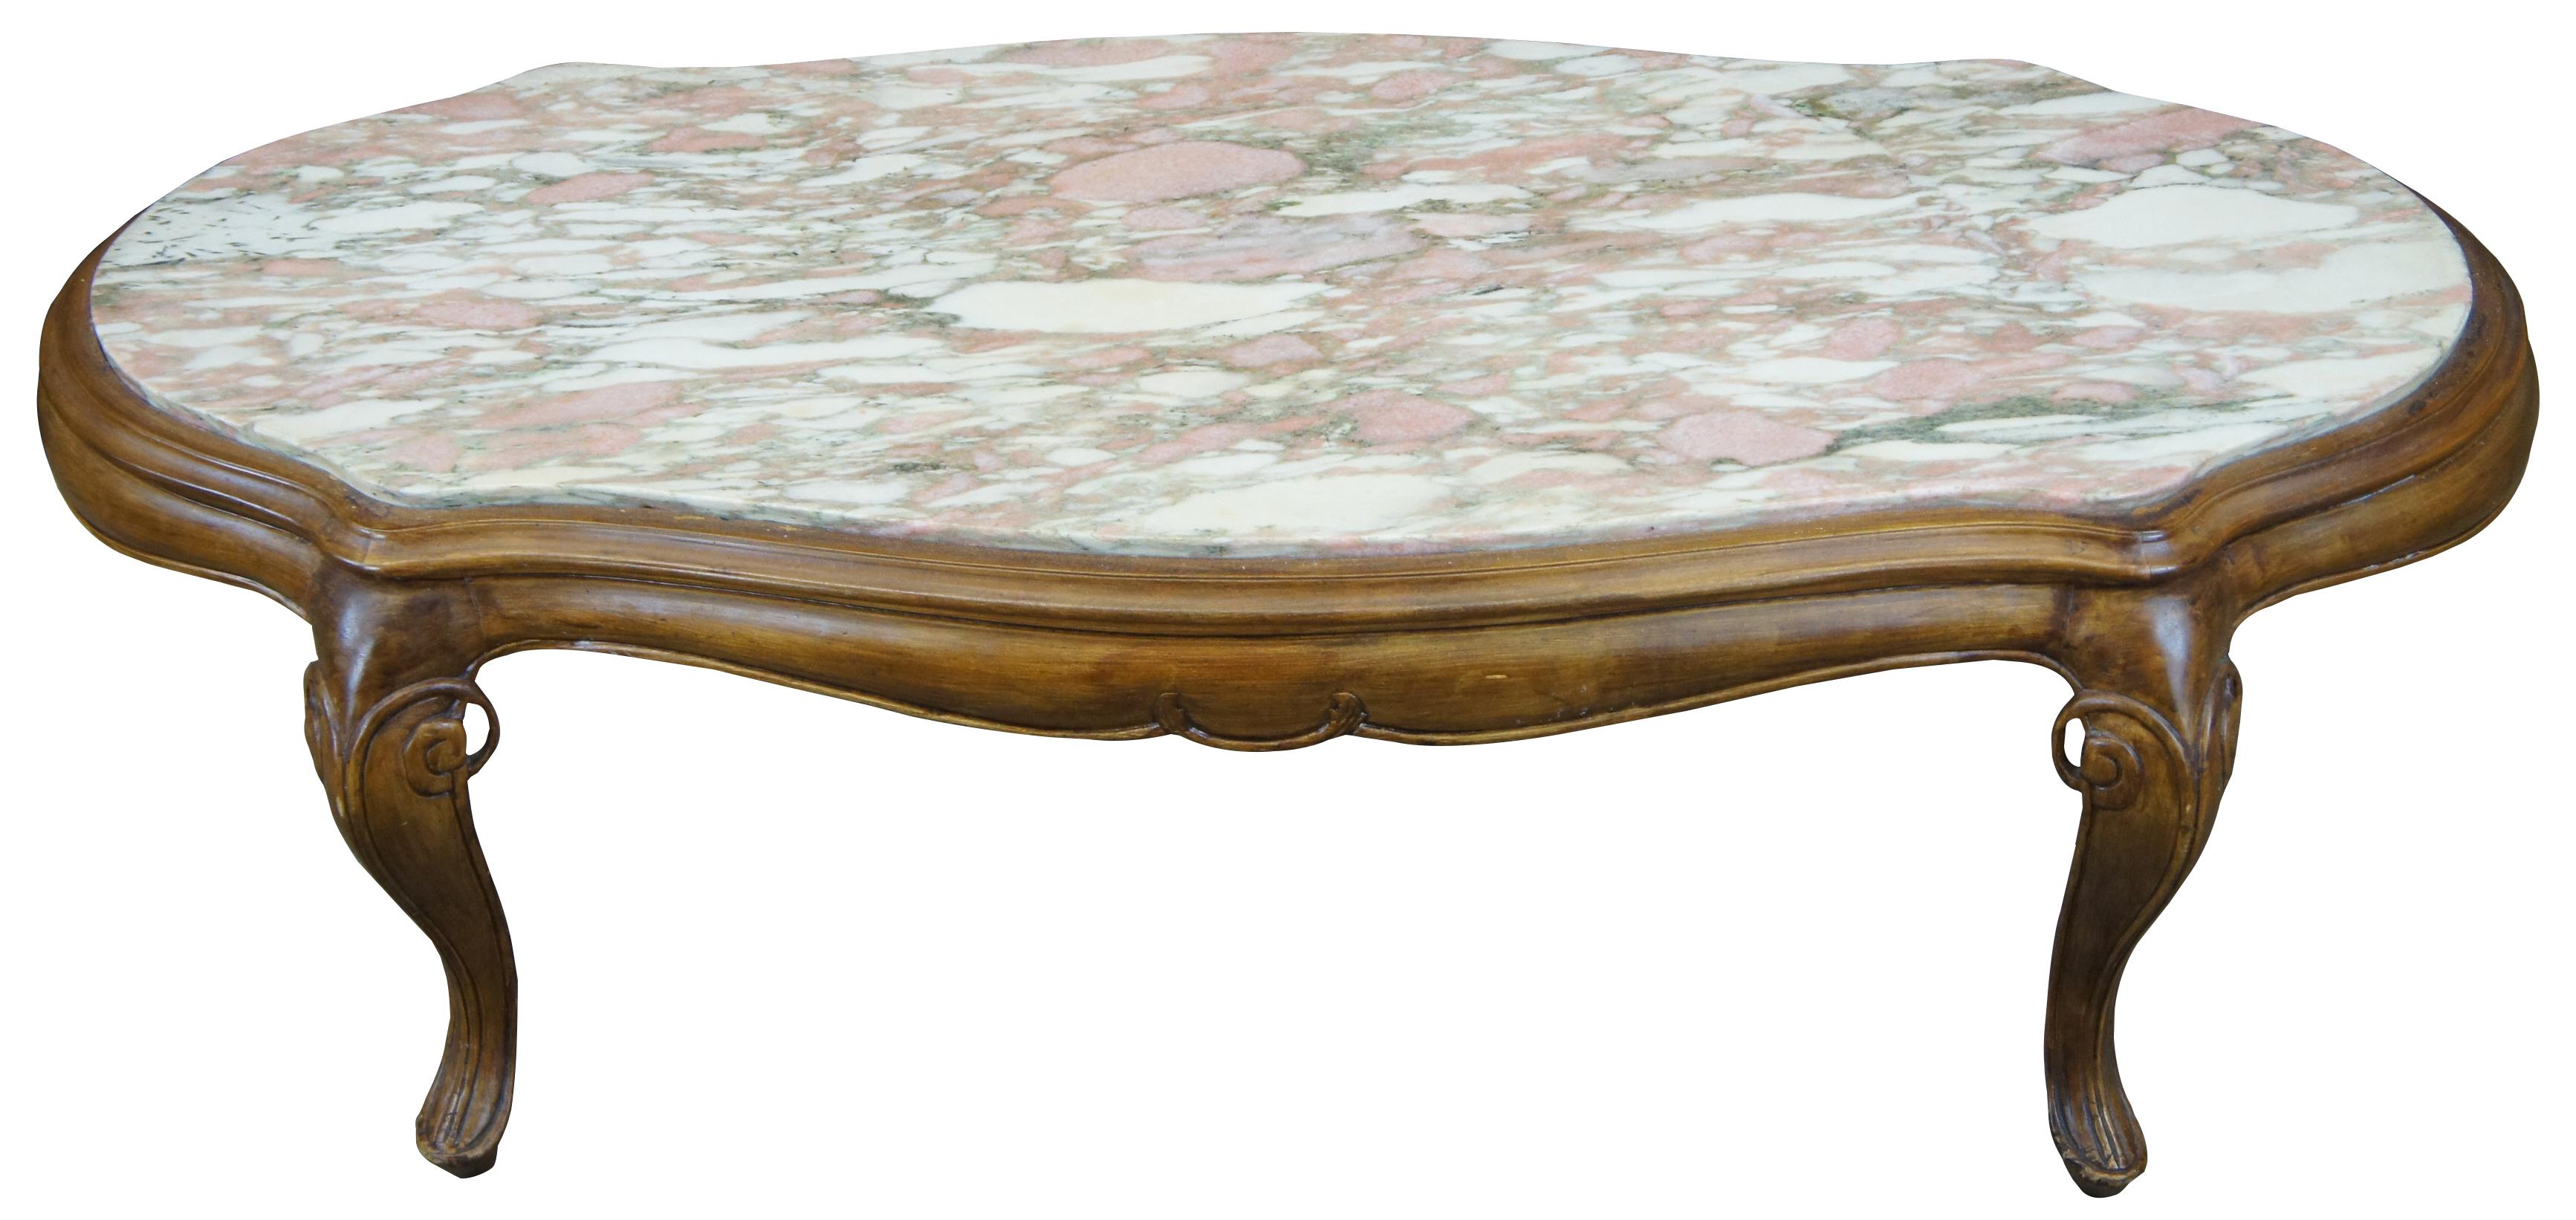 Antique French Provincial coffee table. Made of walnut and pink marble featuring oval serpentine form with scrolled and beveled accents.
 